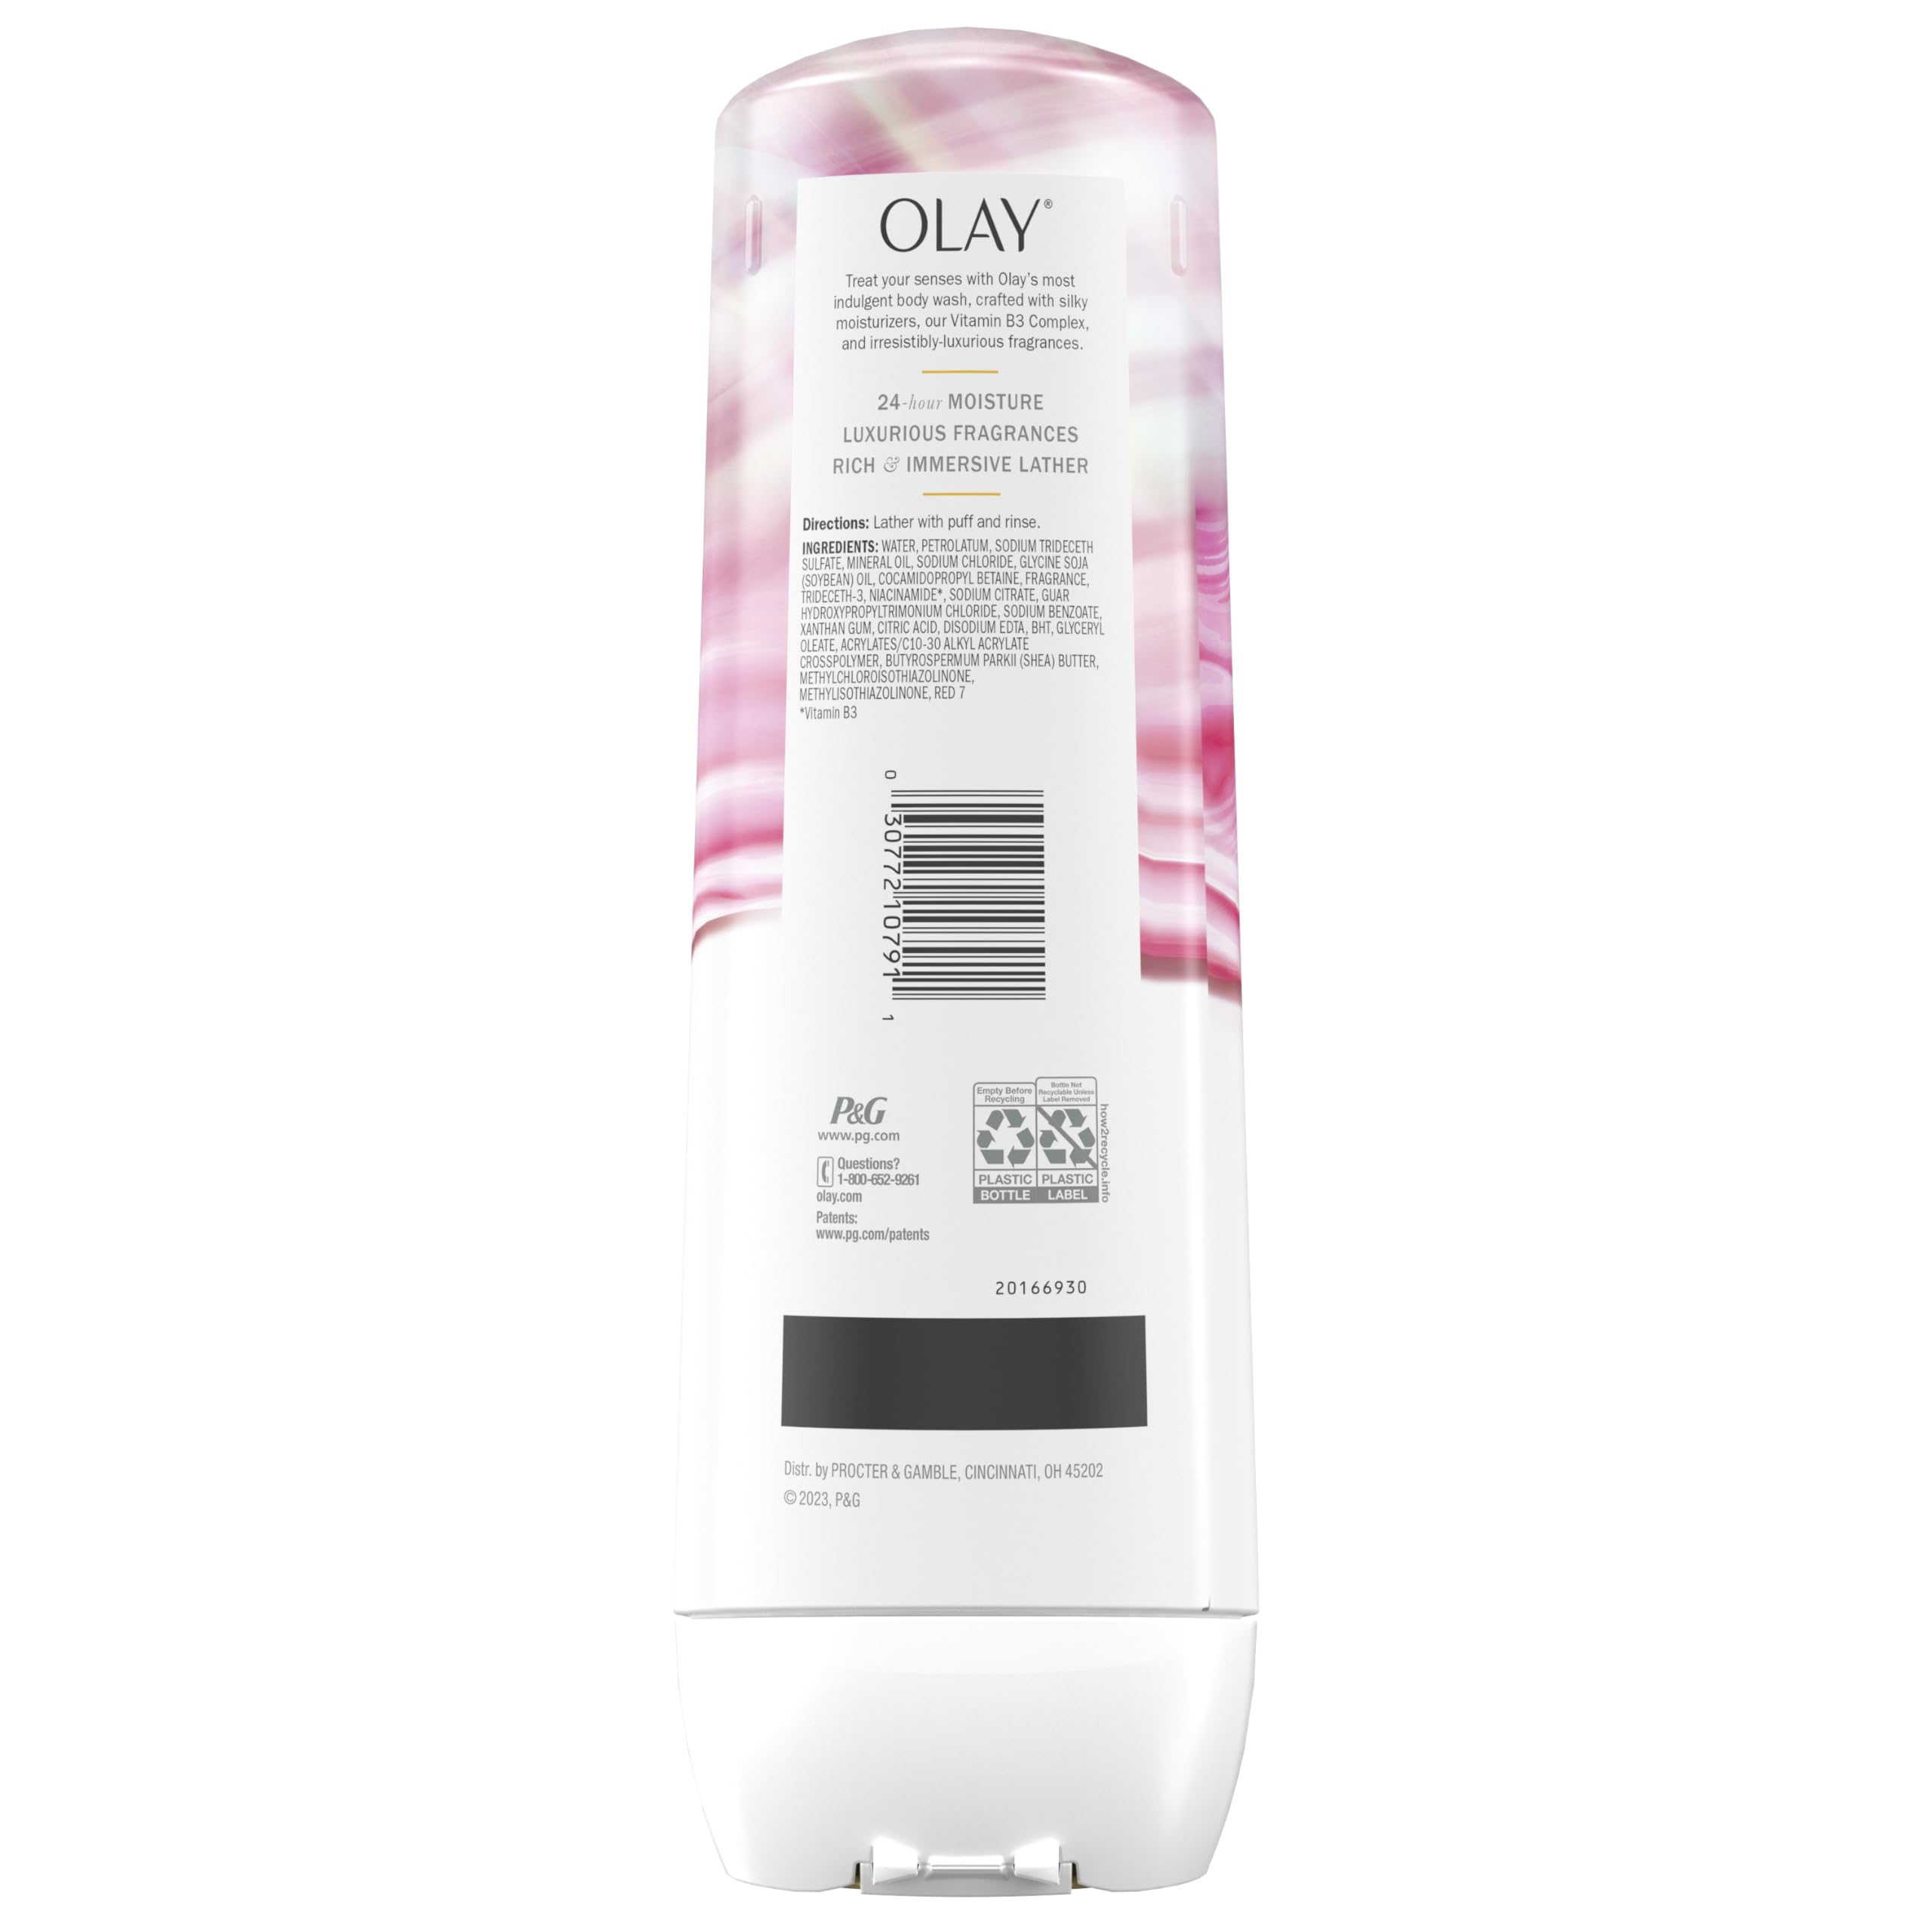 Olay Indulgent Moisture Body Wash for Women, Infused with Vitamin B3, Notes of Rose and Cherry Creme Scent, 20 fl oz